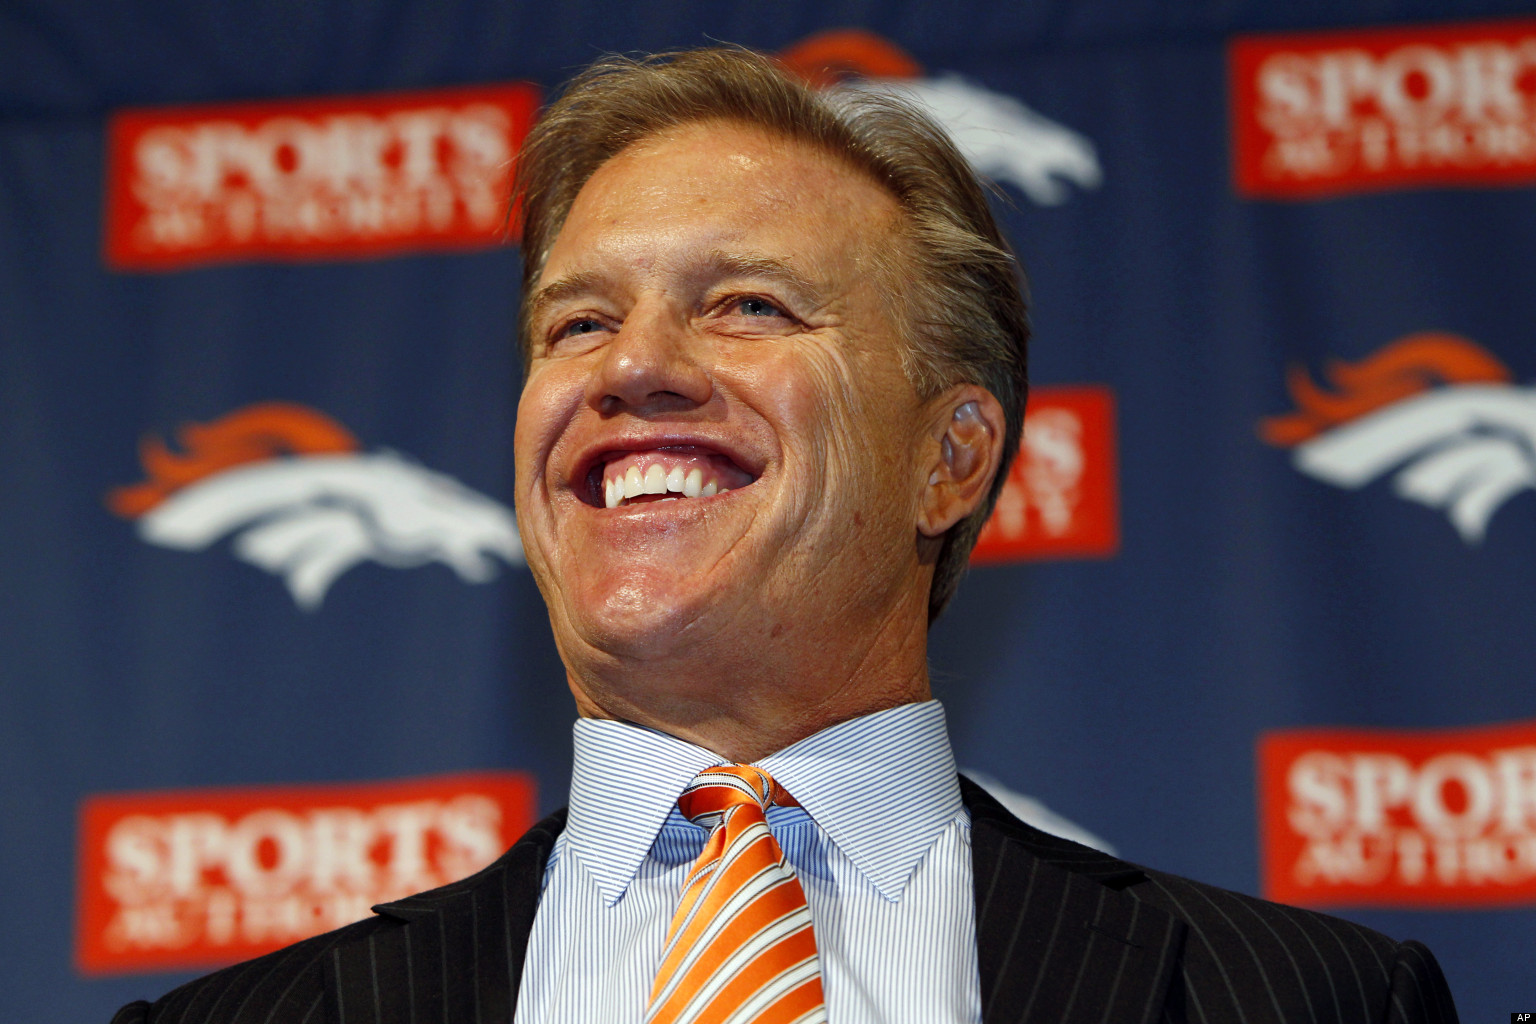 REPORT: John Elway Comes Out Of Retirement, Will Play QB For